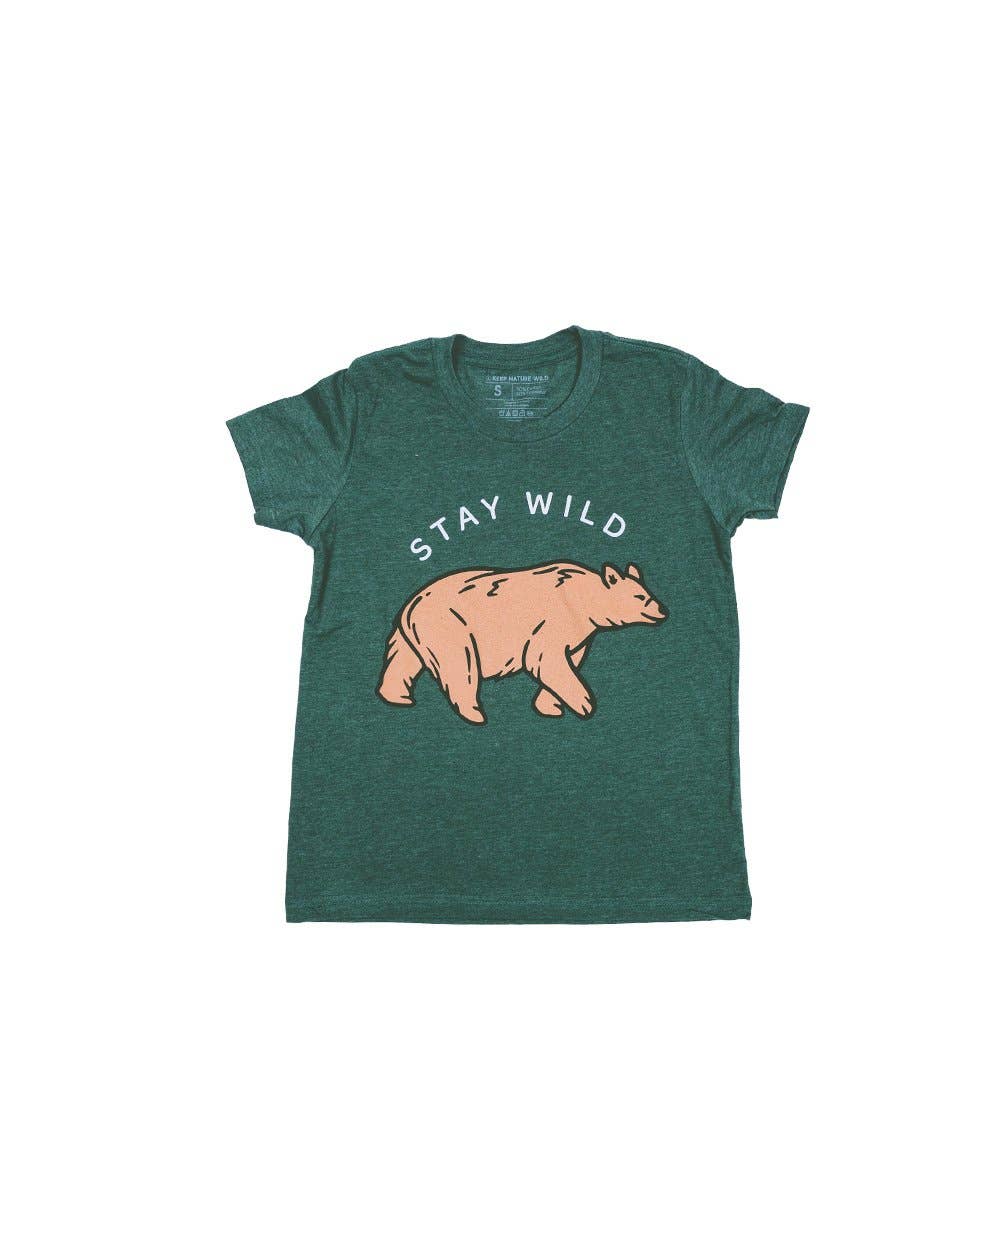 Stay Wild green youth bear shirt by Keep Nature Wild